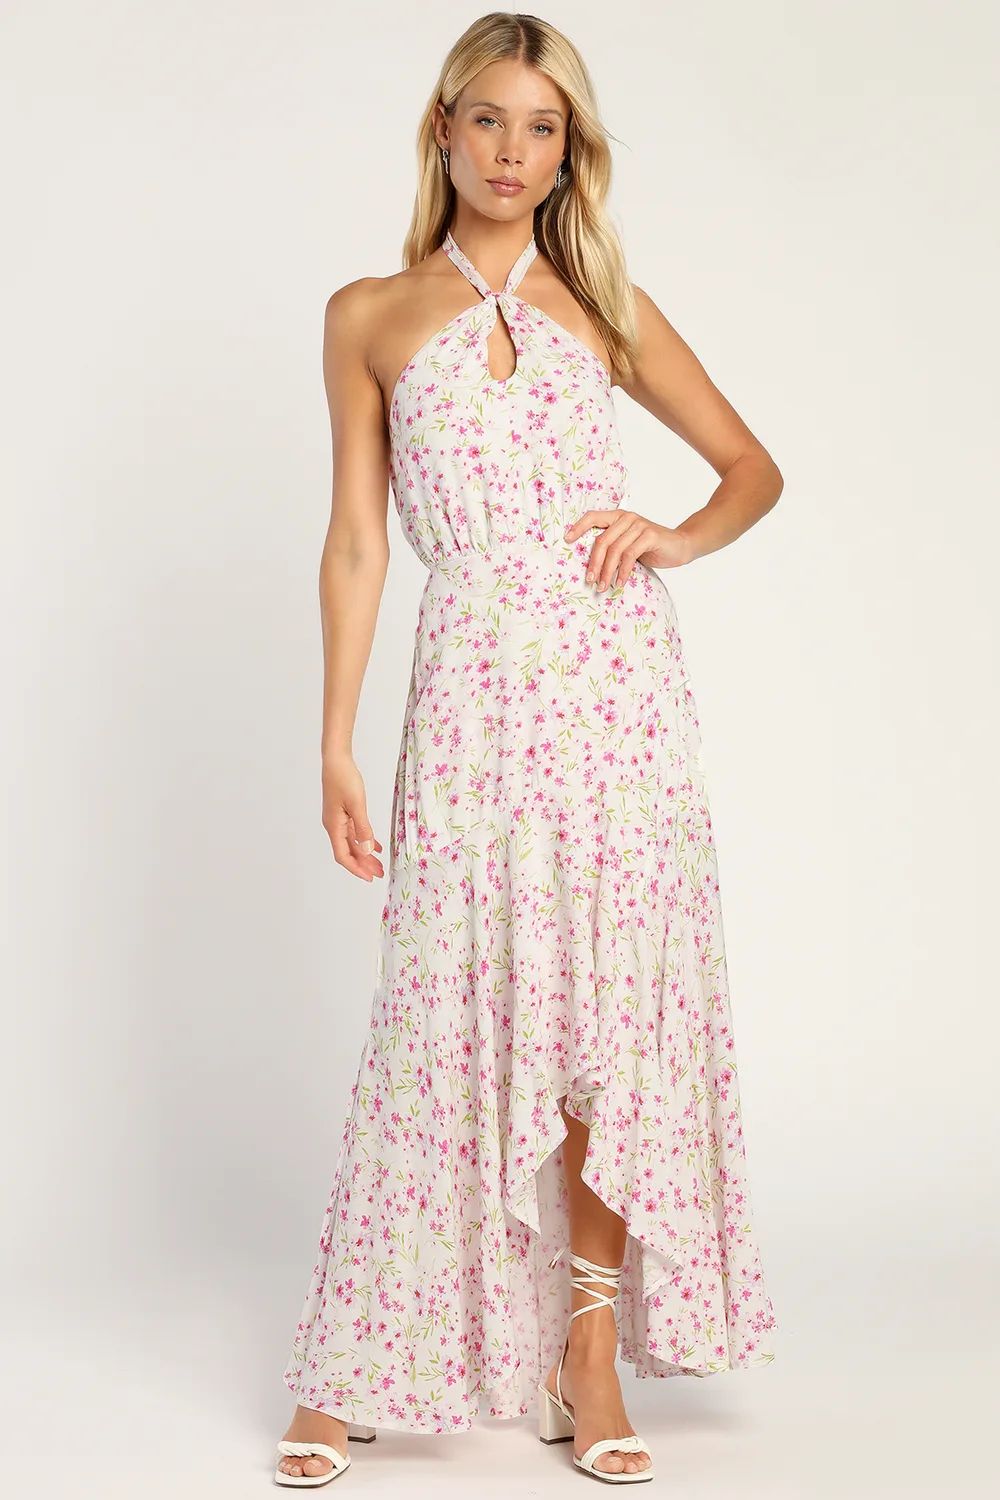 Moment of Romance Ivory Floral Print Halter High-Low Maxi Dress | Lulus (US)